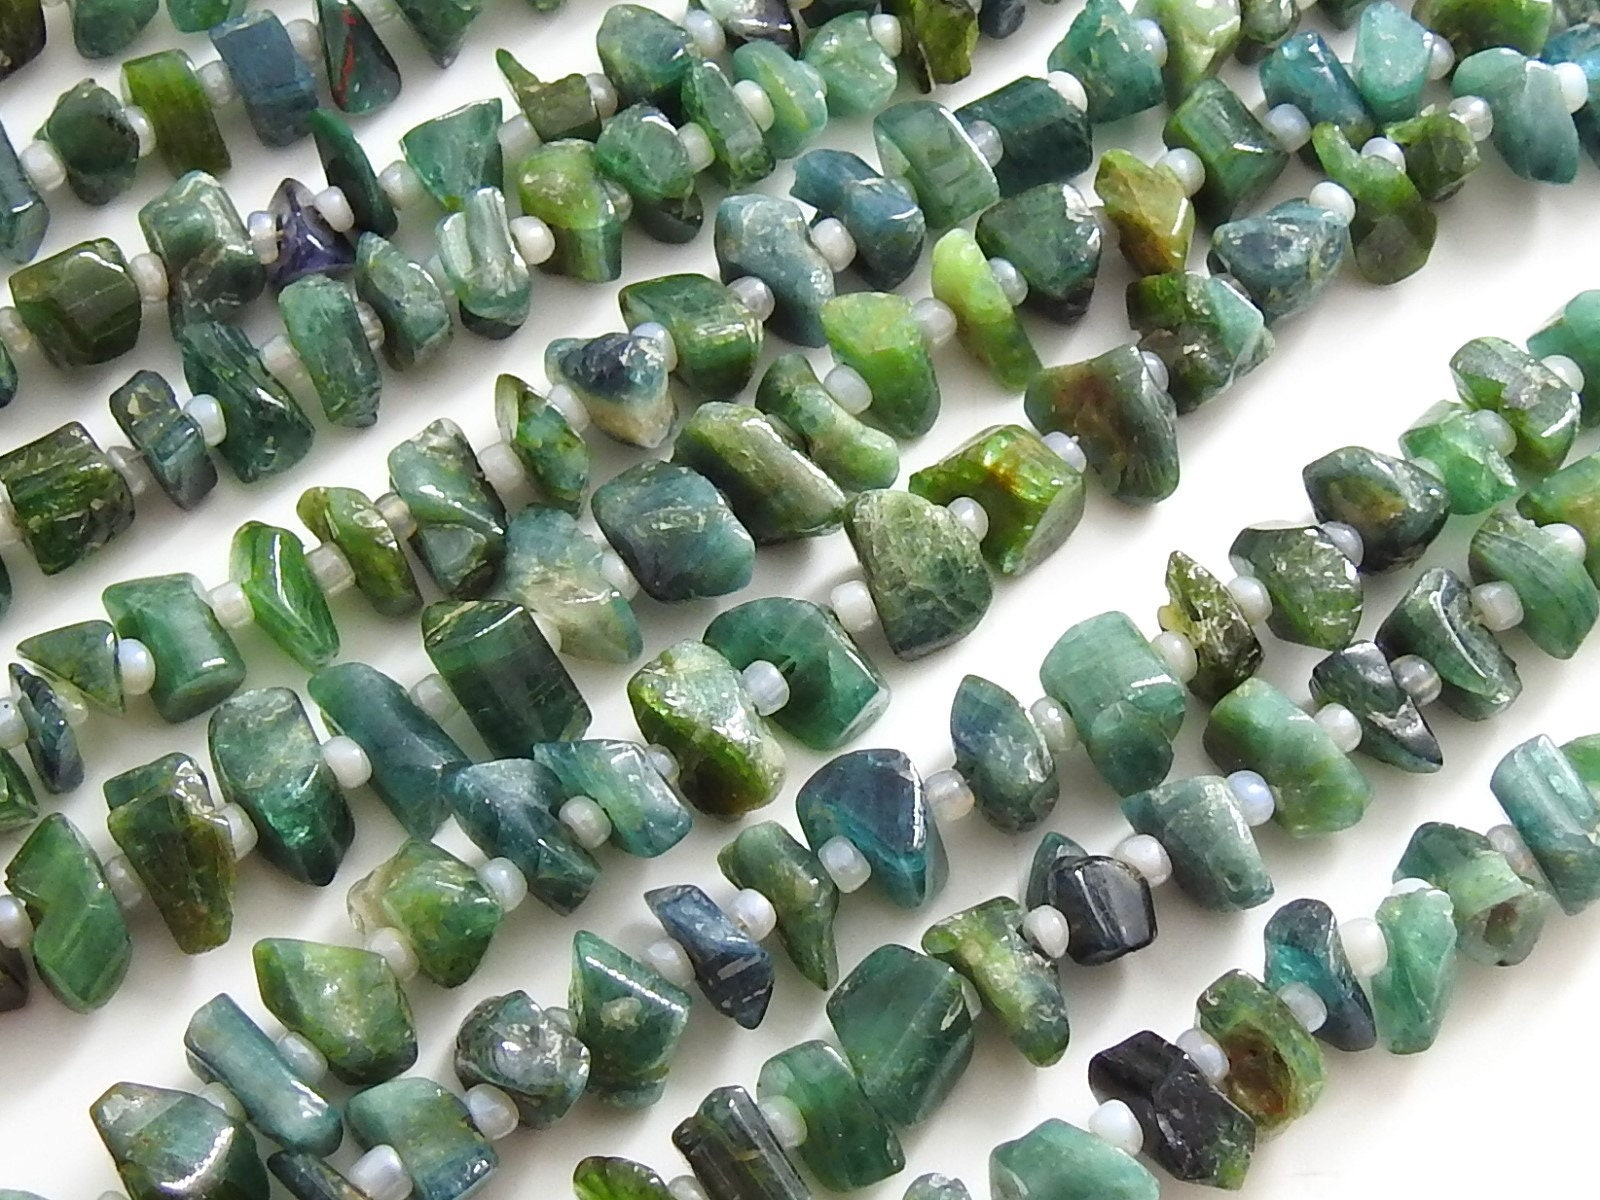 Green Tourmaline Rough Bead,Anklets,Uncut,Chip,Nuggets,Raw,Polished,Loose Stone,For Making Jewelry 16Inch 9X4To5X5MM Approx 100%Natural RB2 | Save 33% - Rajasthan Living 11